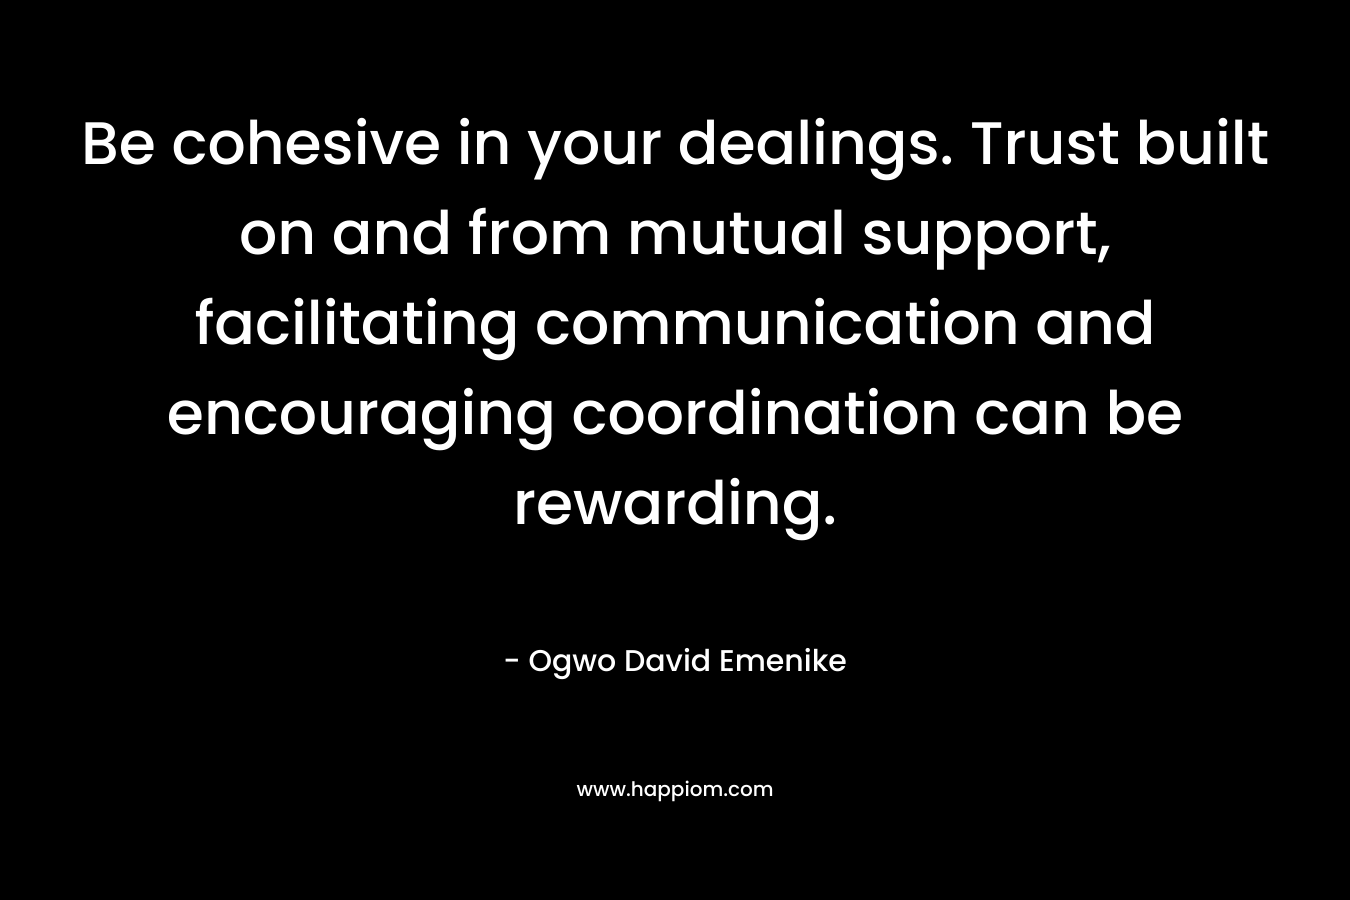 Be cohesive in your dealings. Trust built on and from mutual support, facilitating communication and encouraging coordination can be rewarding. – Ogwo David Emenike